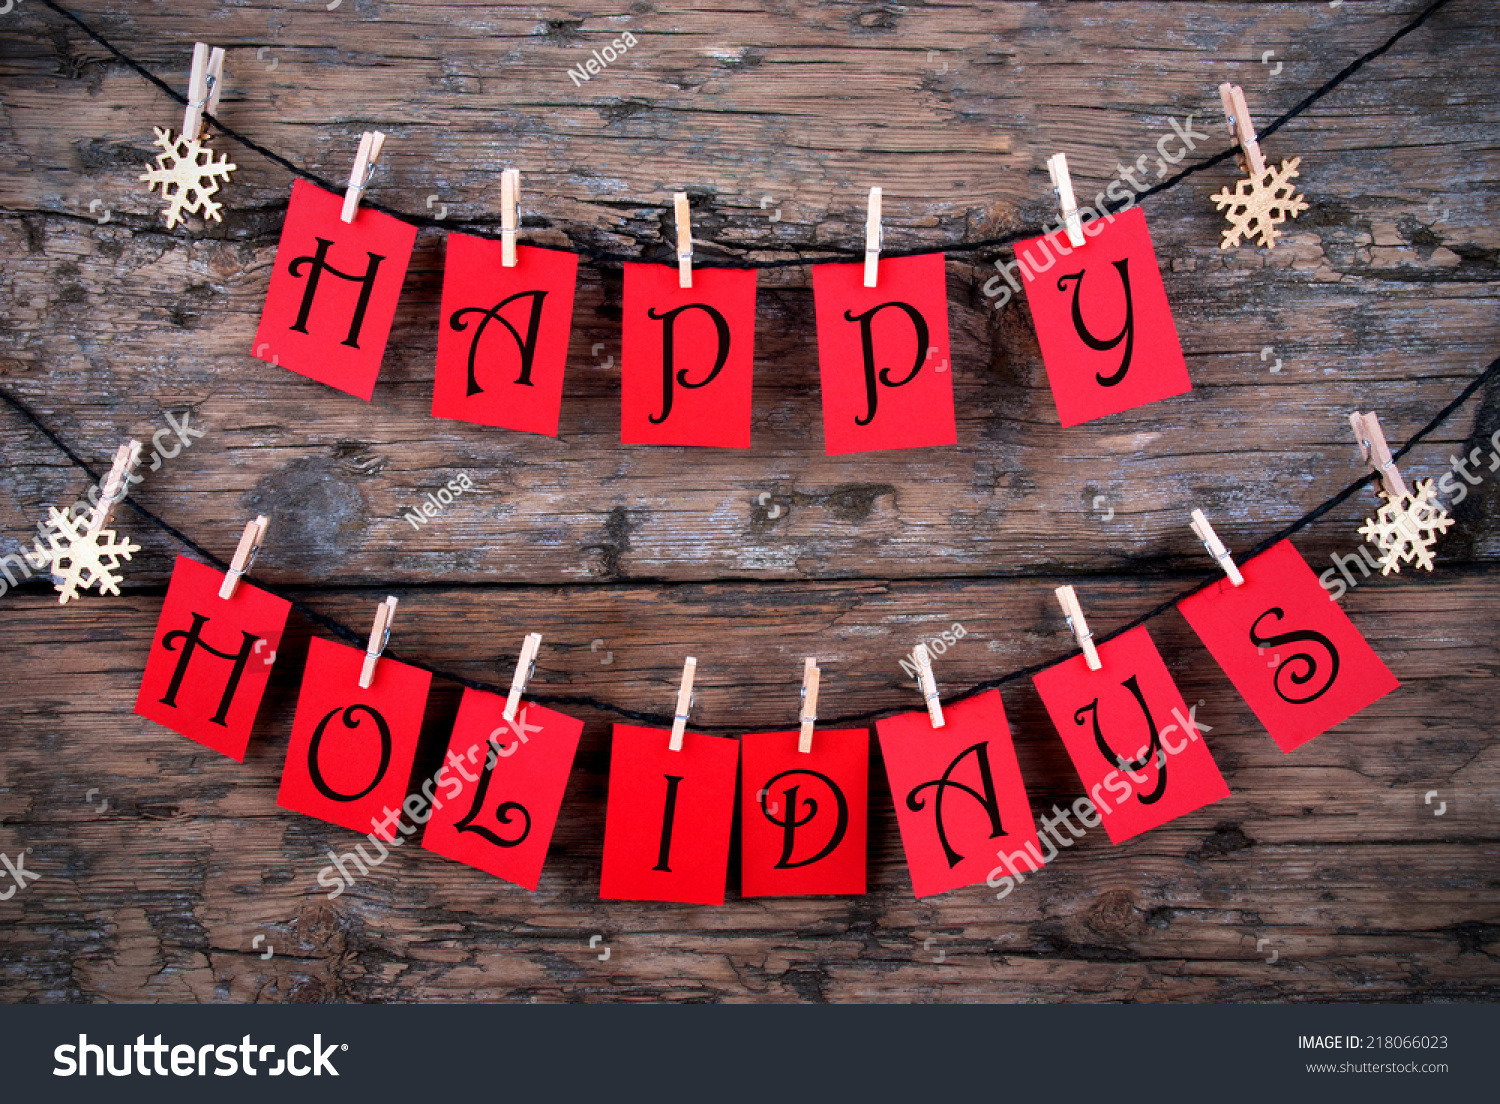 Happy Holidays Greetings on red Tags Hanging on a Line with Snowflakes, Christmas or Winter Background #218066023